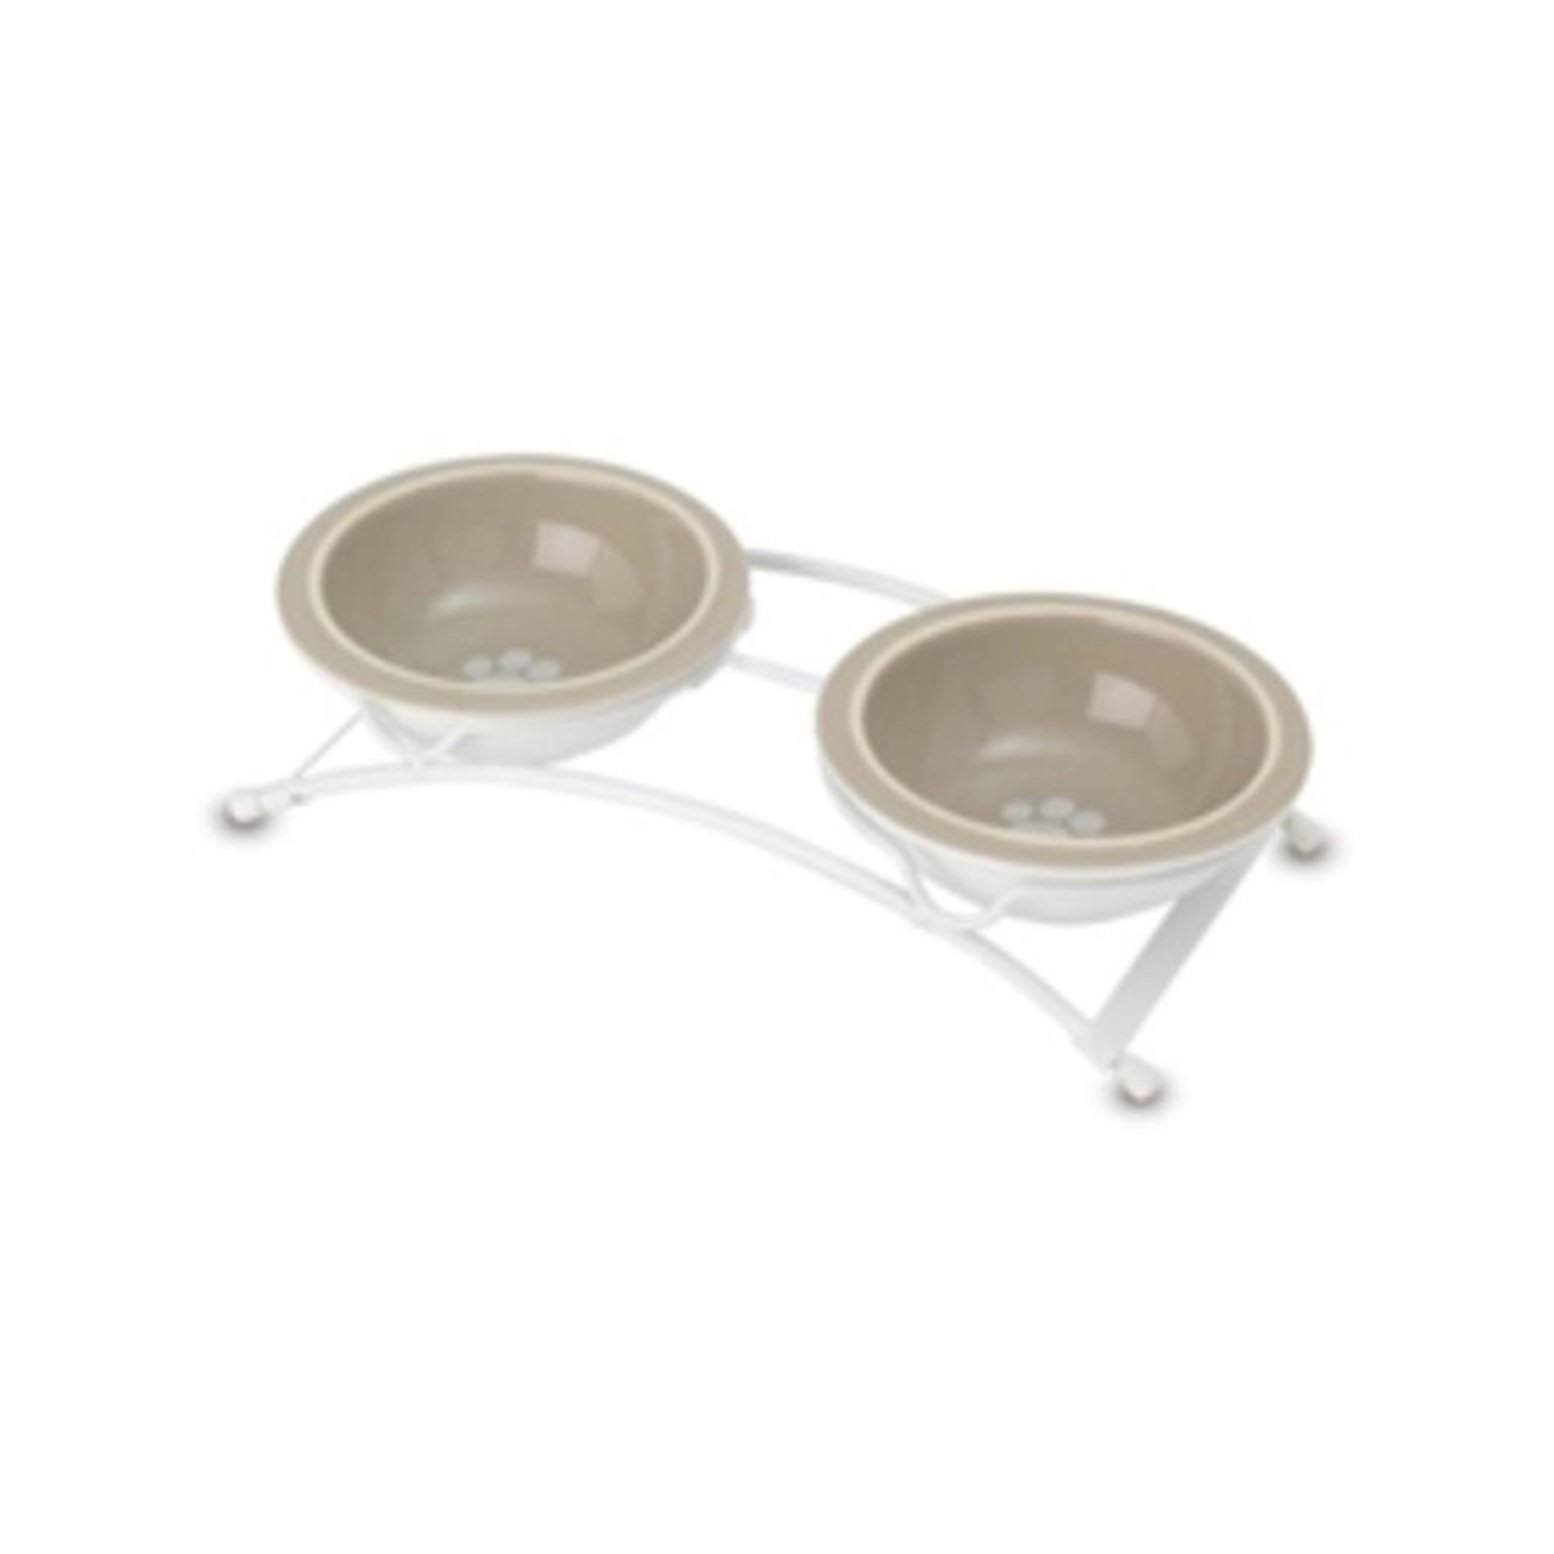 Petrageous Designs Toftee's Paws Pet Feeder - Taupe